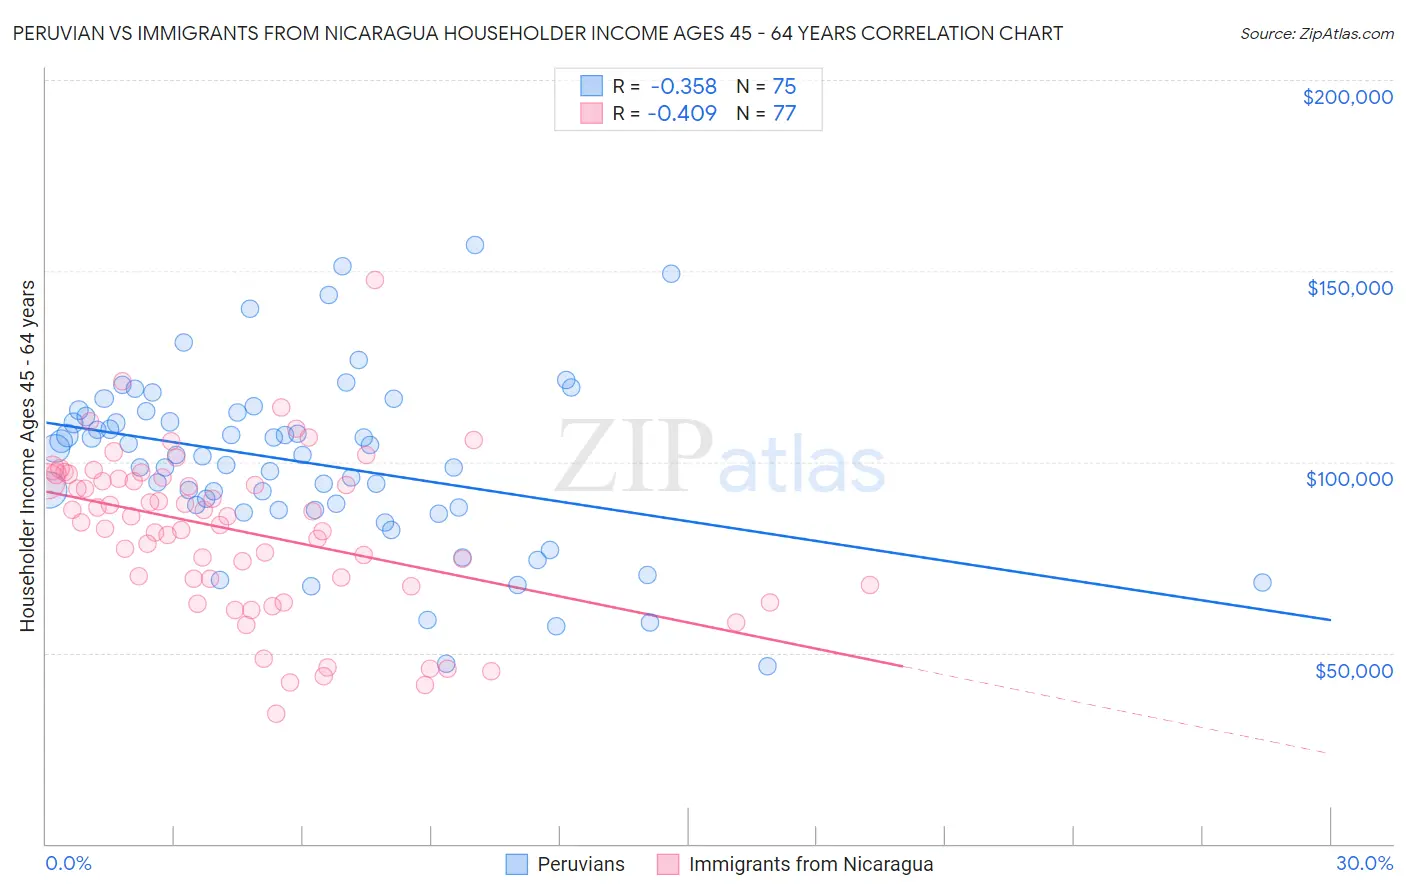 Peruvian vs Immigrants from Nicaragua Householder Income Ages 45 - 64 years